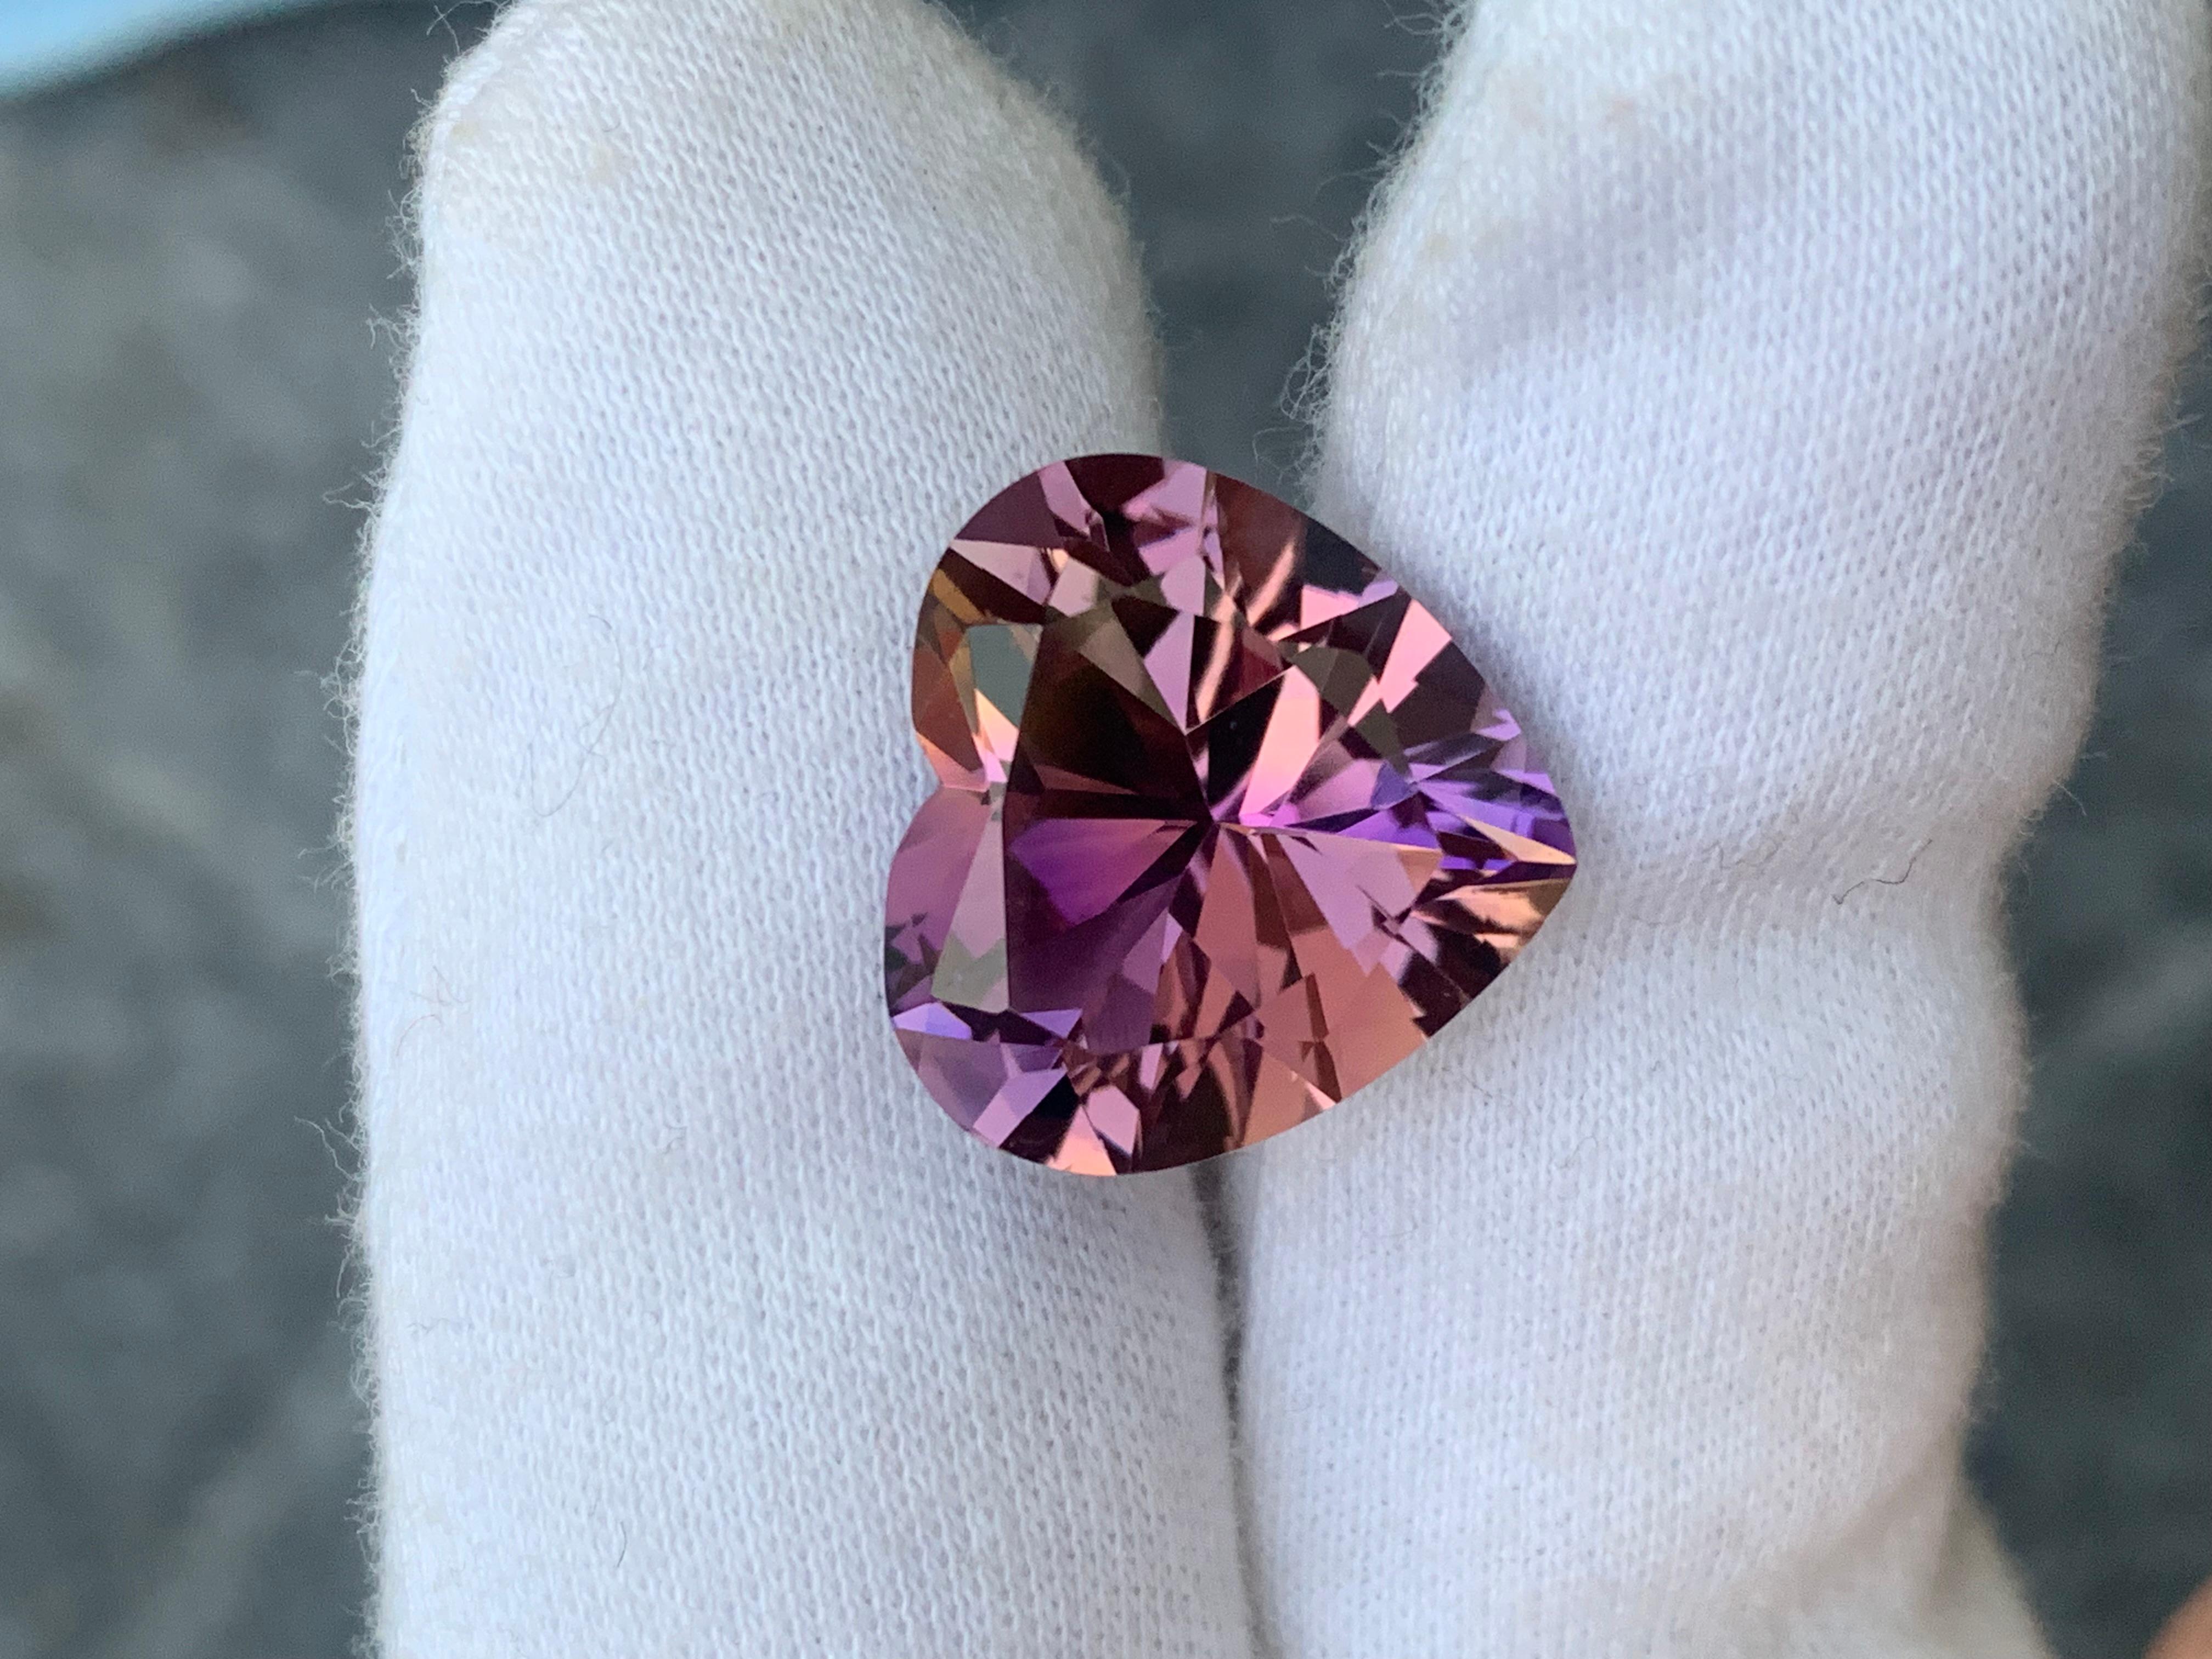 Faceted Ametrine 
Weight: 11.40 Carats
Dimension: 15.6x16.6x9.3 Mm
Origin: Bolivia 
Color: Purple & Yellow
Clarity: Loupe Clean
Certificate: On Demand
Shape: Heart 
For those born in the month of February, you've been graced with amethyst as your